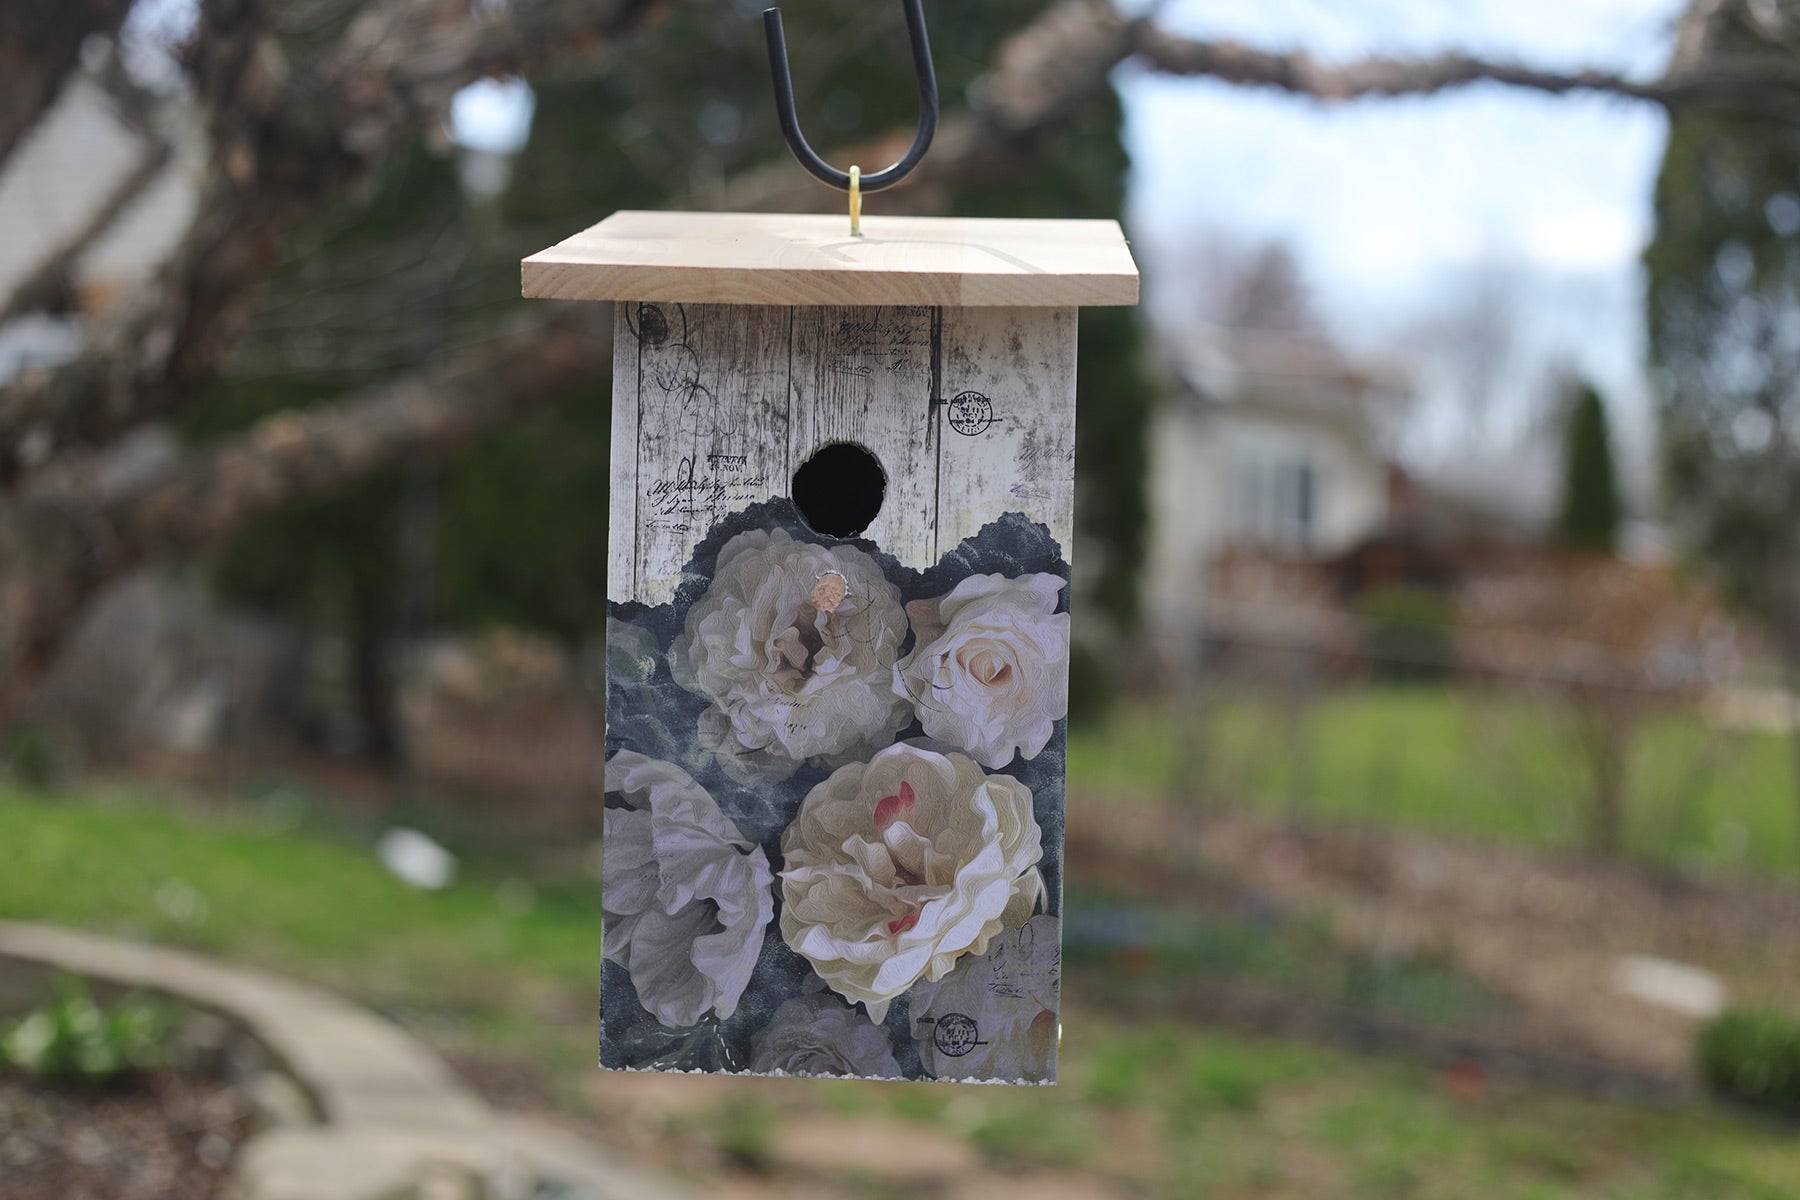 Do you hear French music? Beautiful old-fashioned roses and weathered painted wood decoupaged on cream colored background with stamped lettering. Made of weather and insect resistant cedar, wood glue, polyacrylic sealed, easy bottom cleanout and ready to hang. 6 1/2" L x 5 3/8" W x 12 1/2" H.